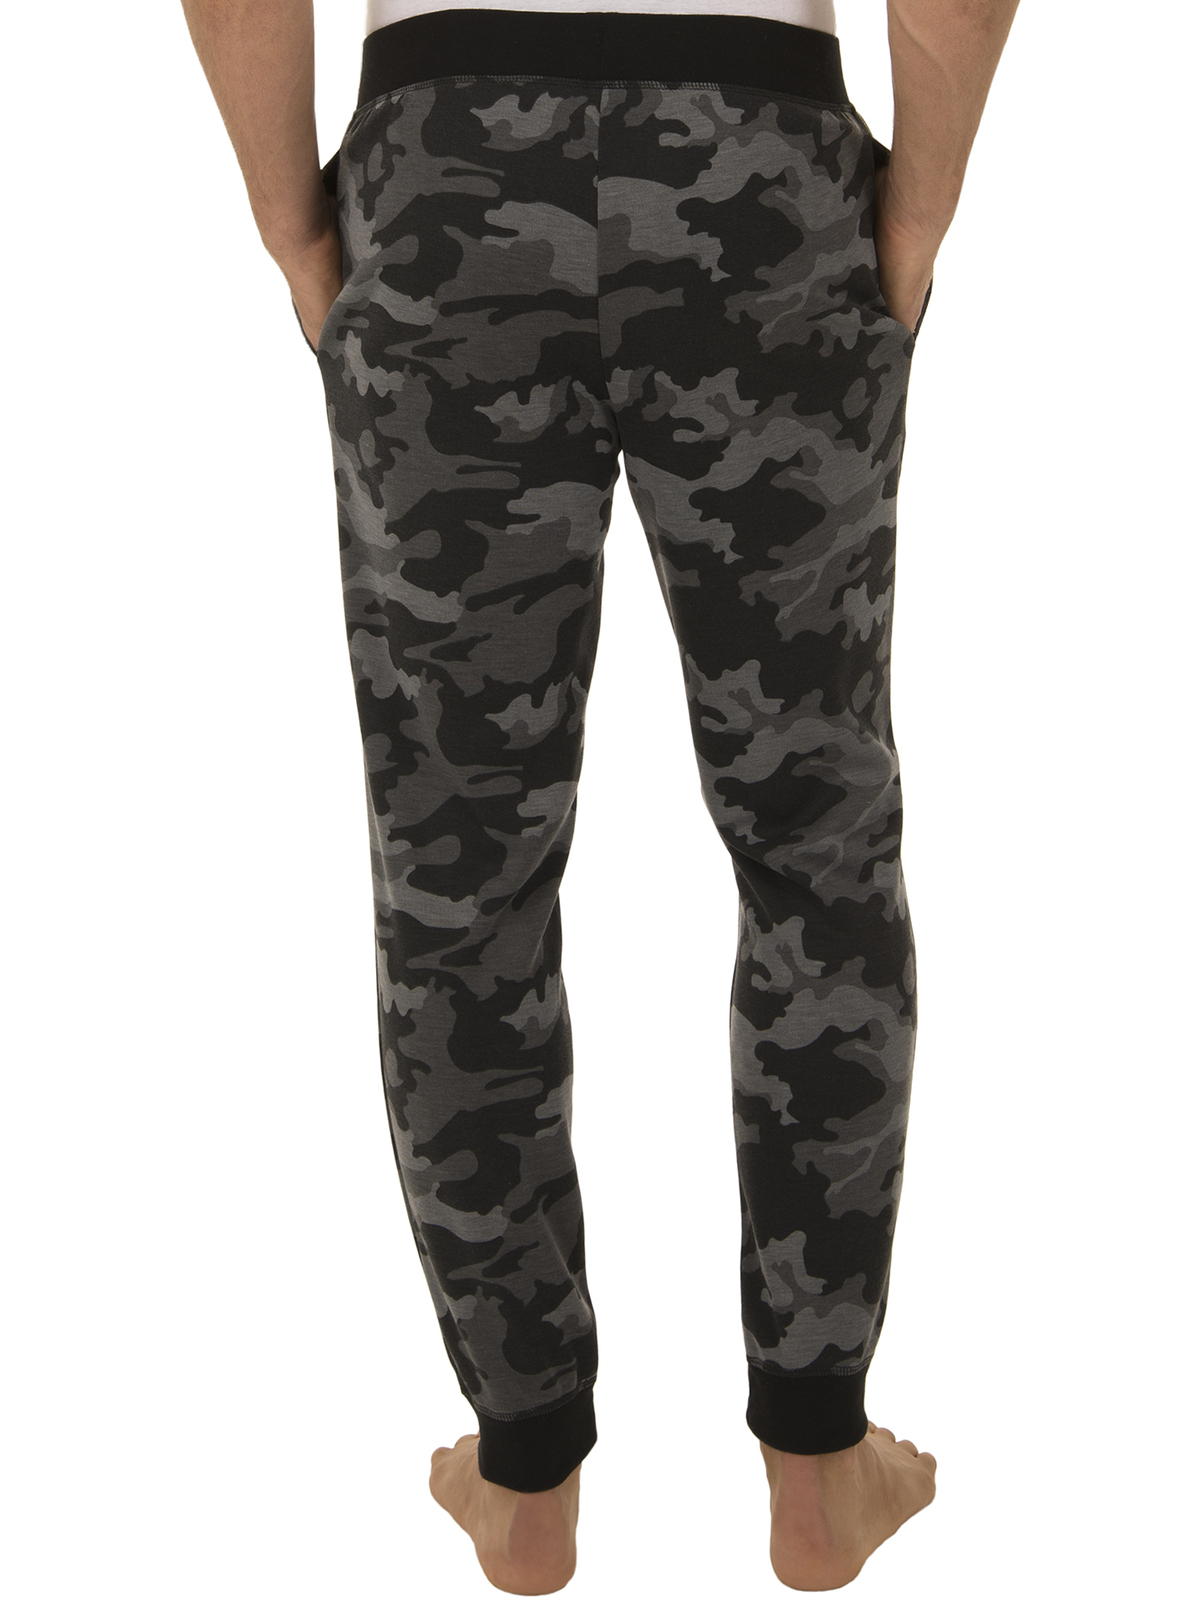 Fruit of the Loom Men's Camo Jogger Sleep Pant Mens Camouflage Lounge ...